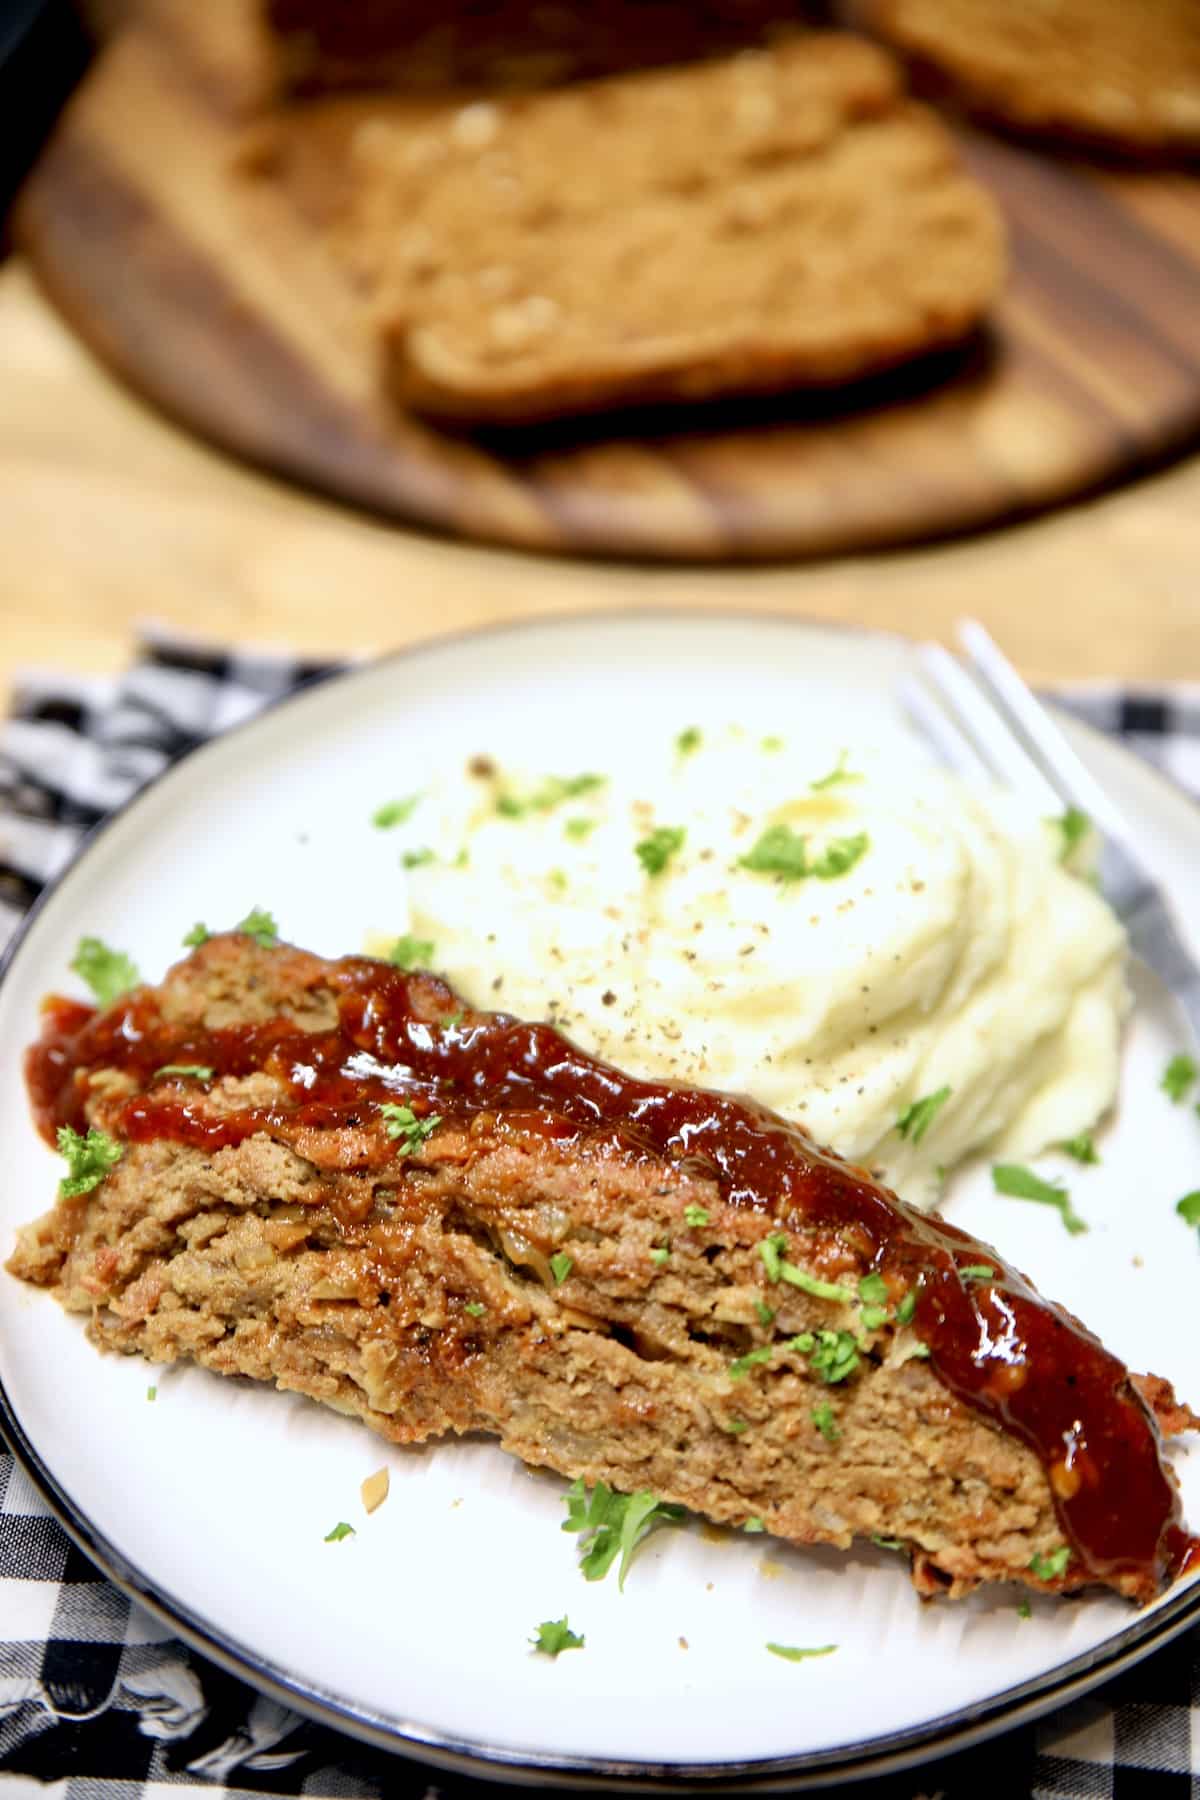 Sliced meatloaf with bbq sauce on a plate with mashed potatoes.